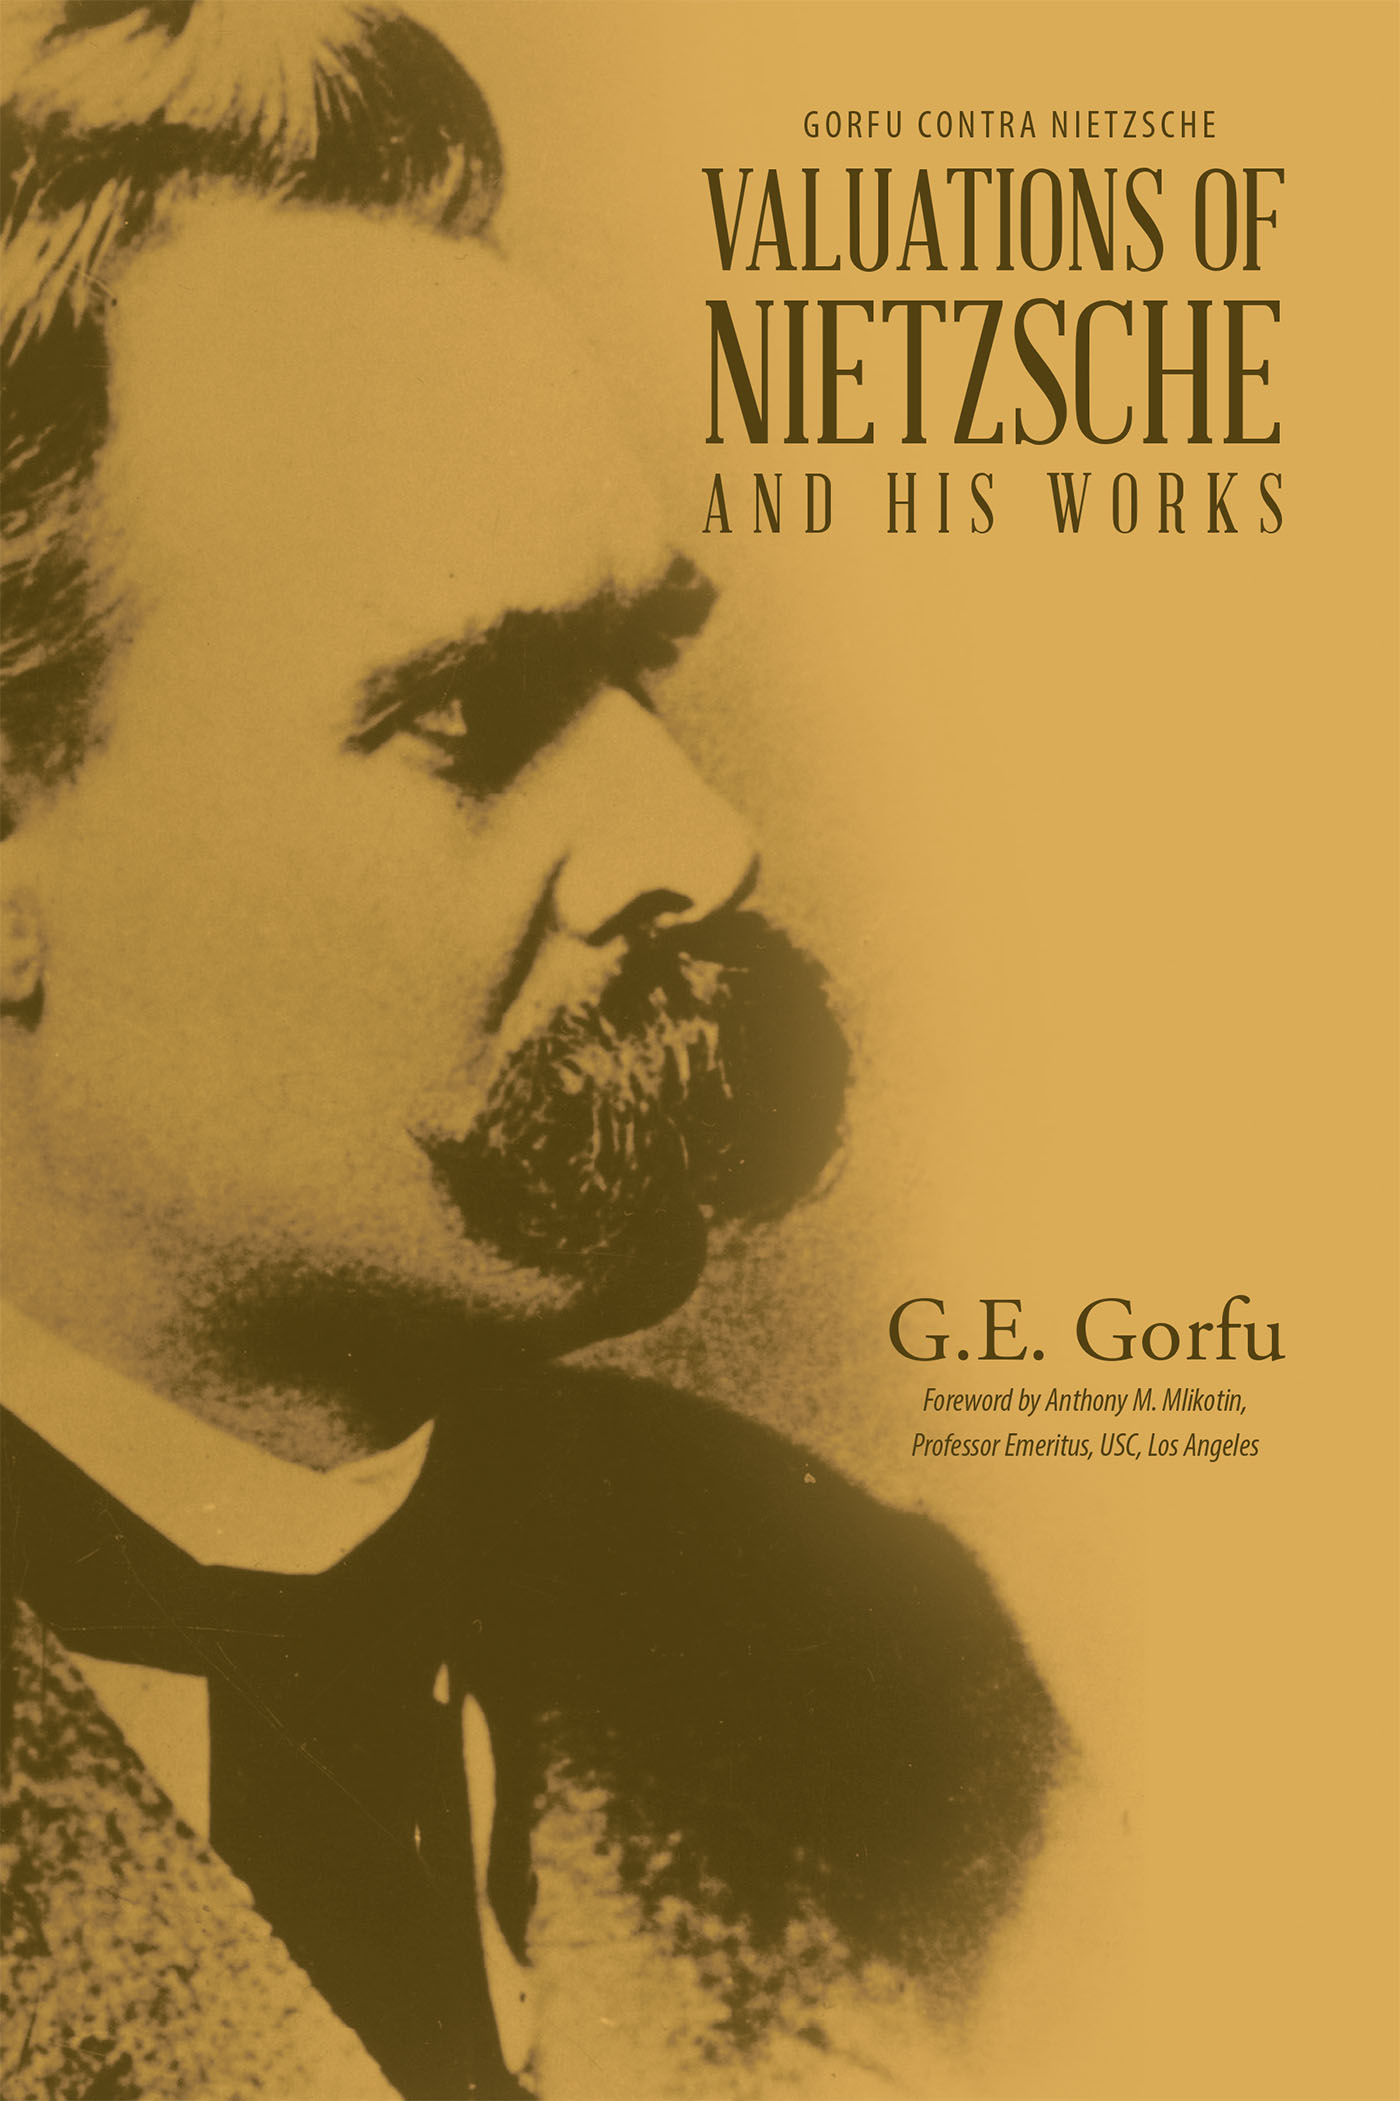 Author G.E. Gorfu’s New Book “Valuations of Nietzsche and His Works” is